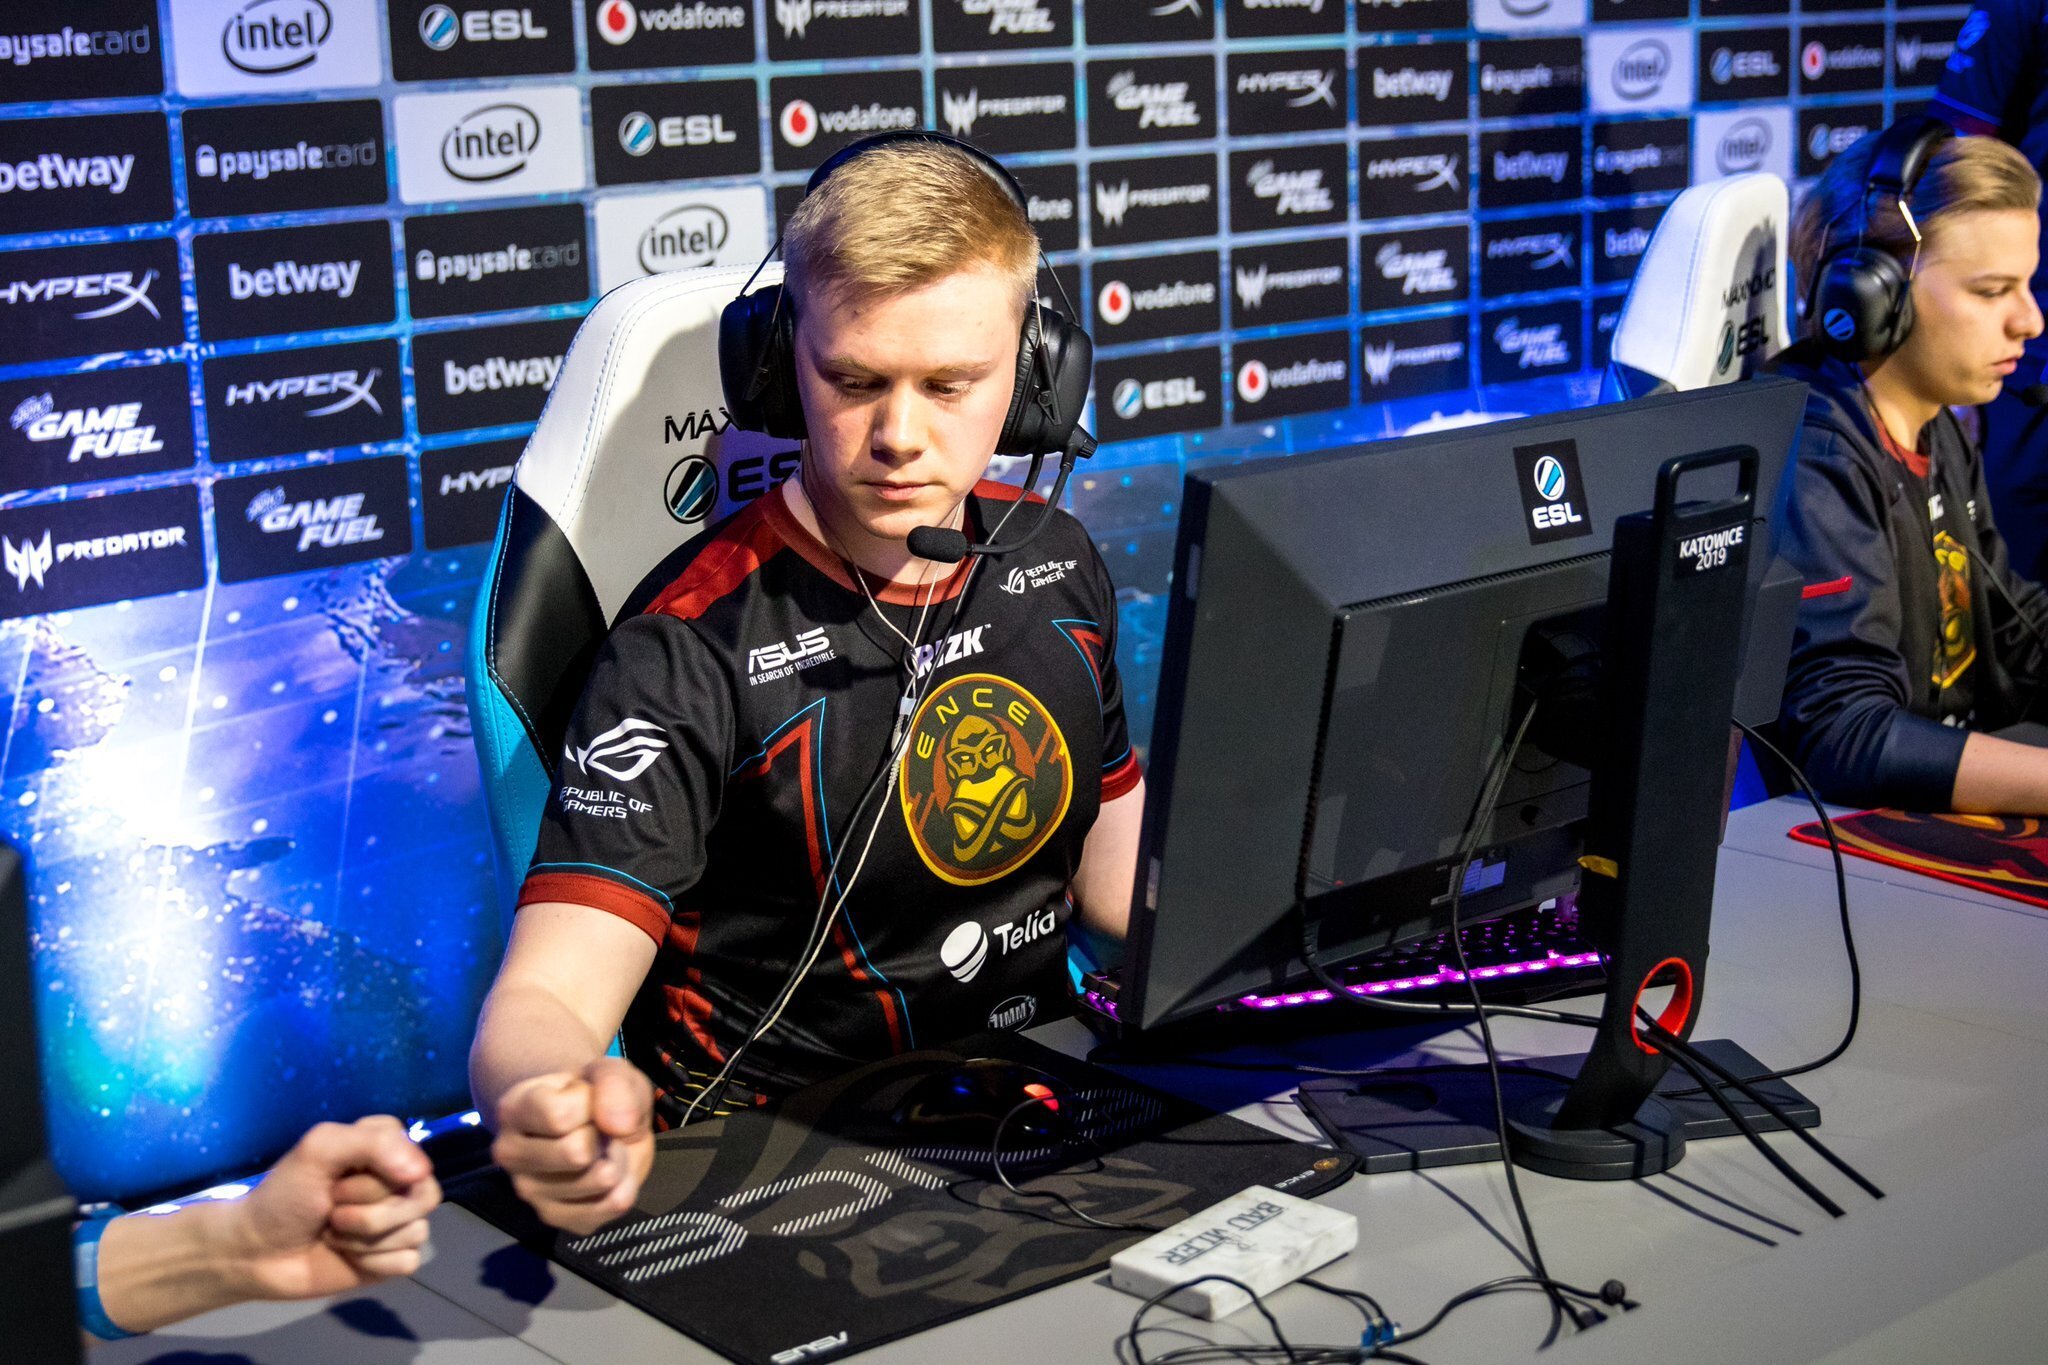 The IEM Katowice European Minor concluded today and saw two teams advancing to the Major as New Challengers - ENCE & Vitality.